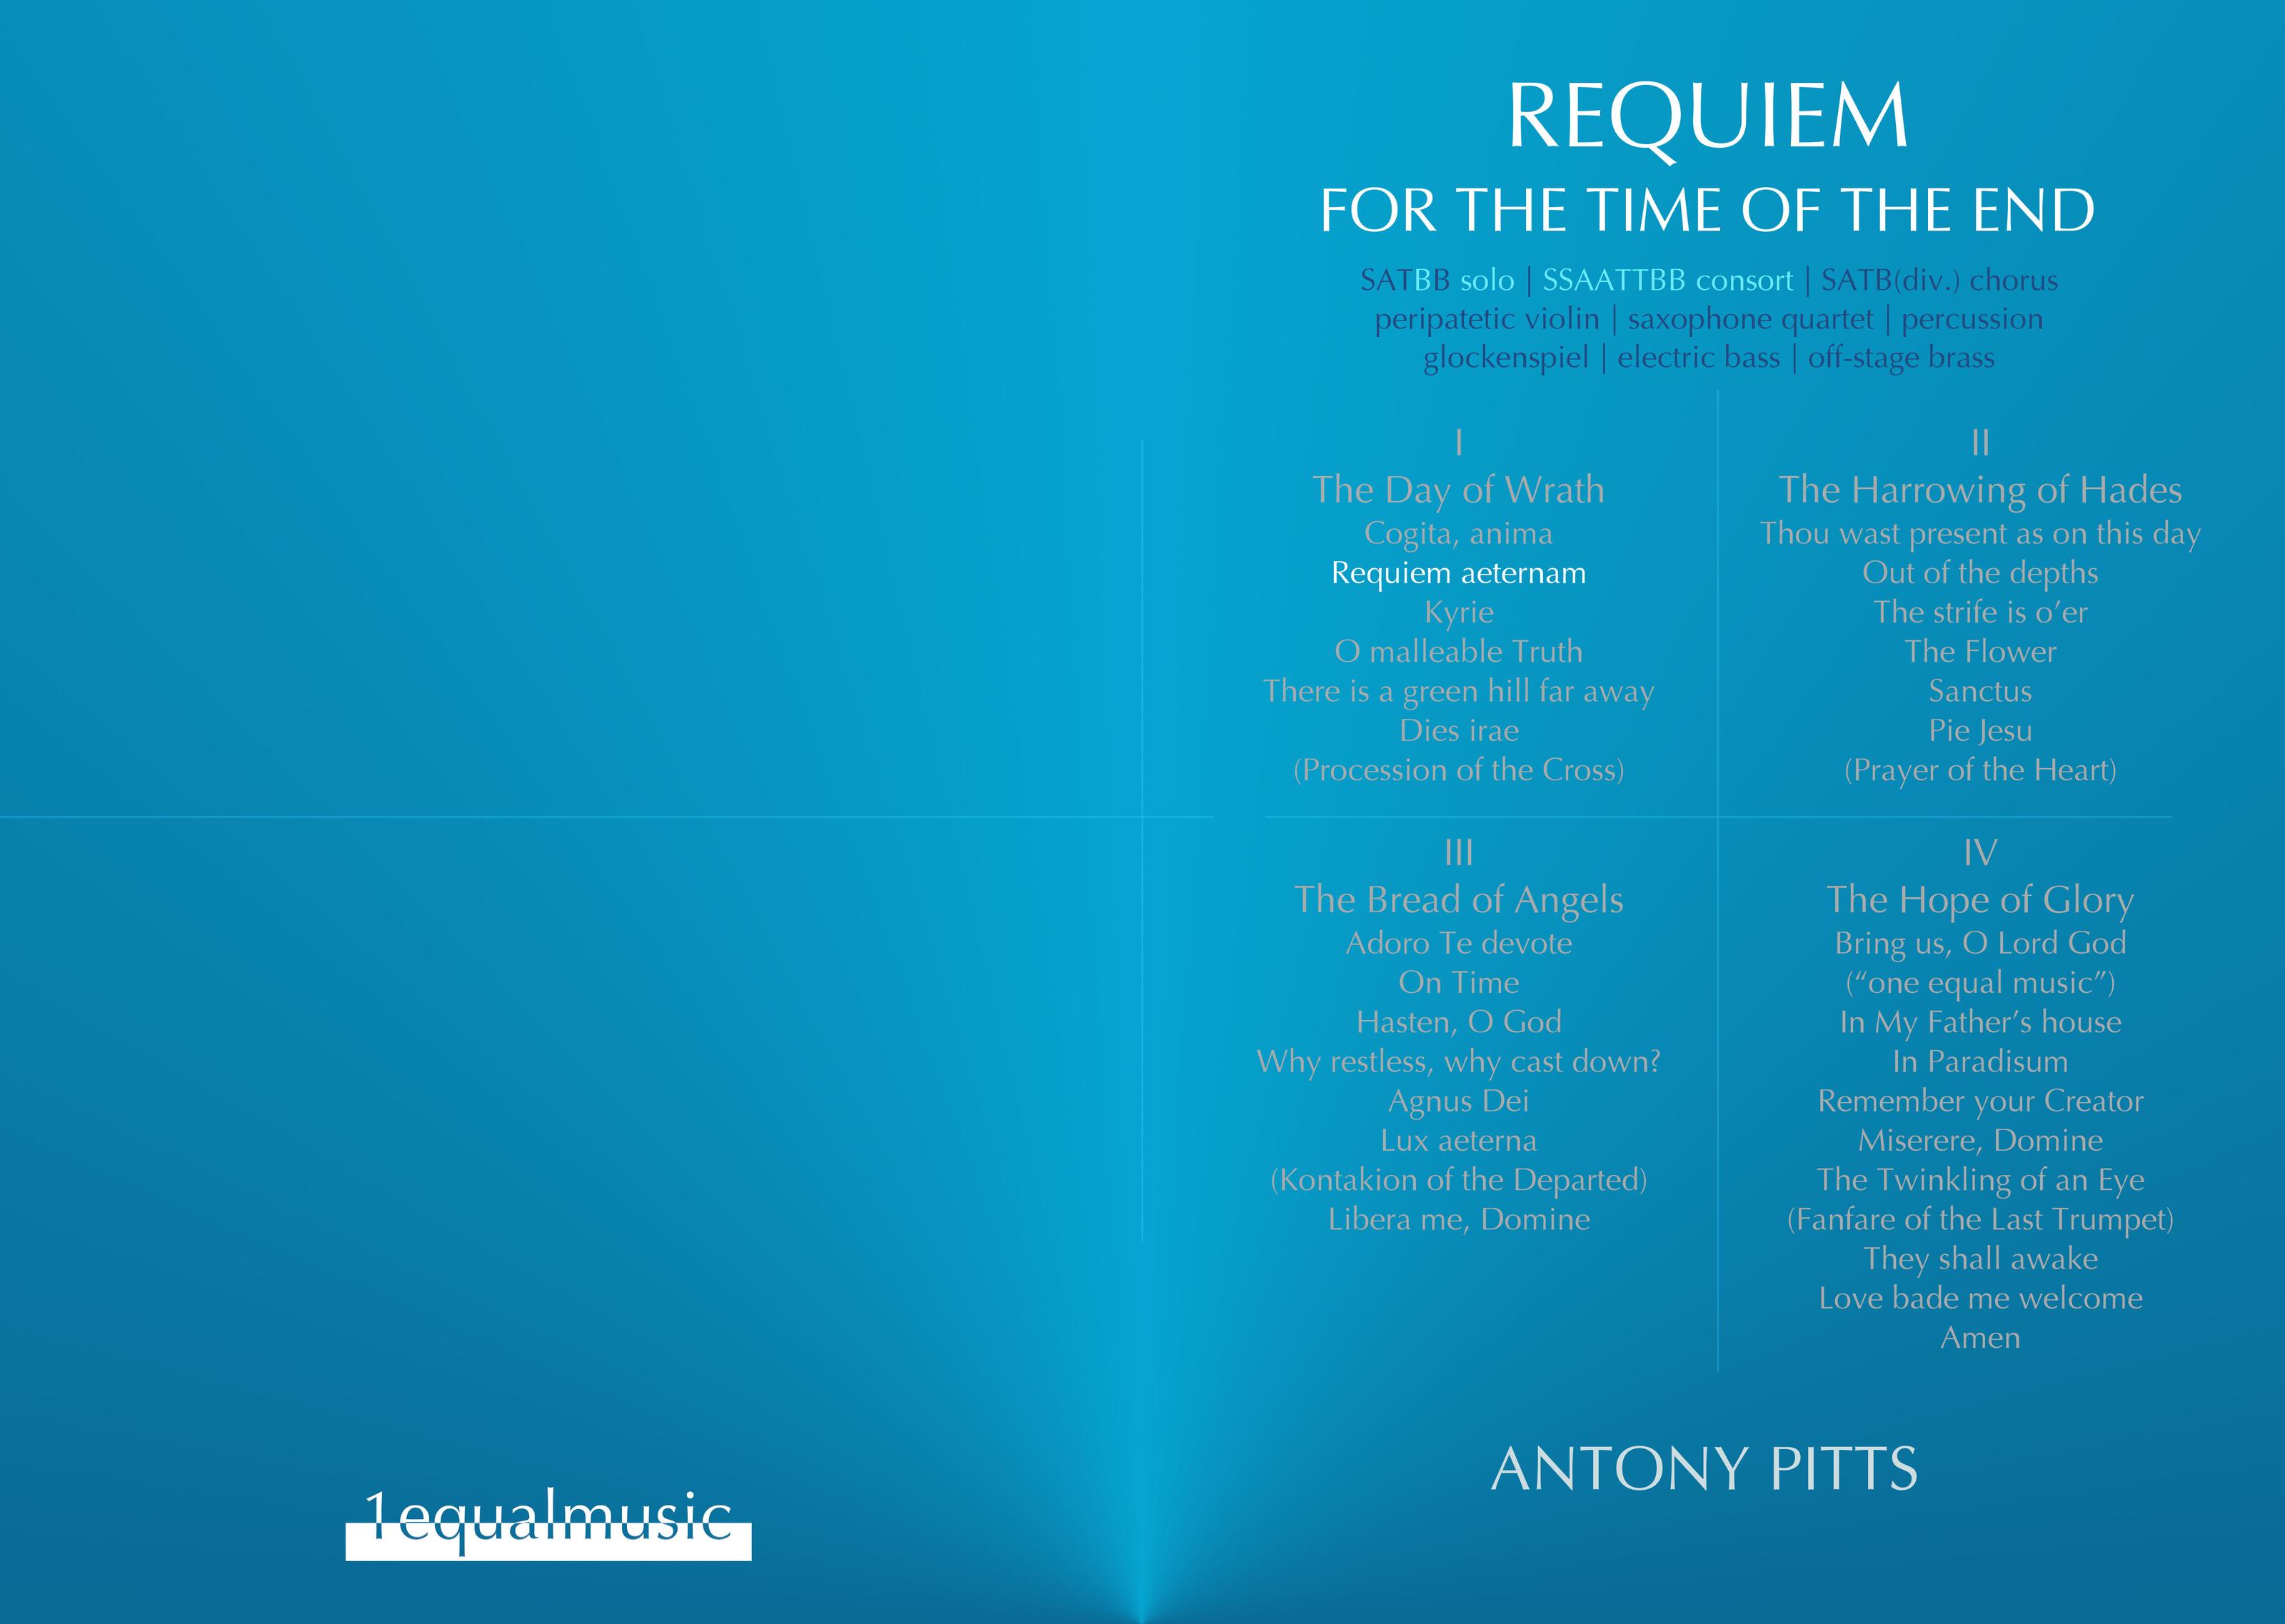 Six movements from Requiem for the Time of the End